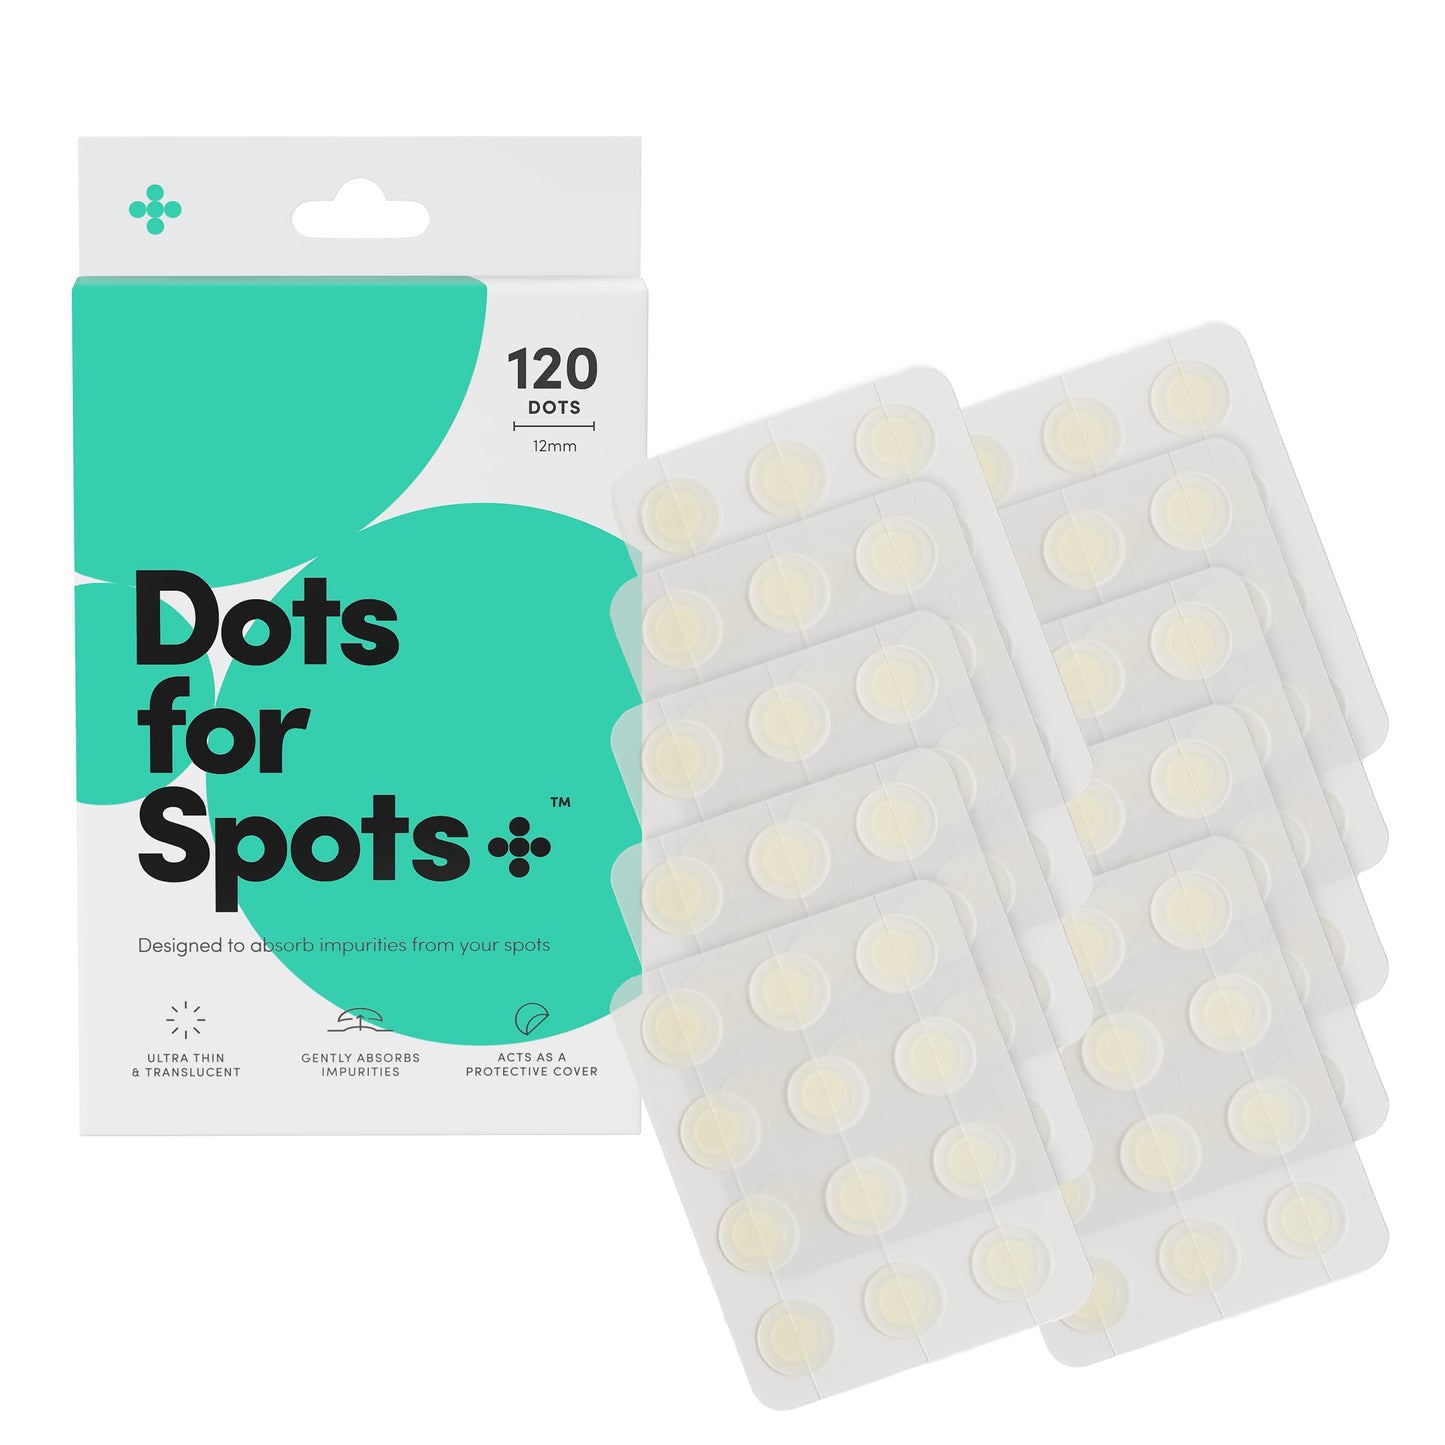 Dots for Spots Acne Patches - Pack of 24